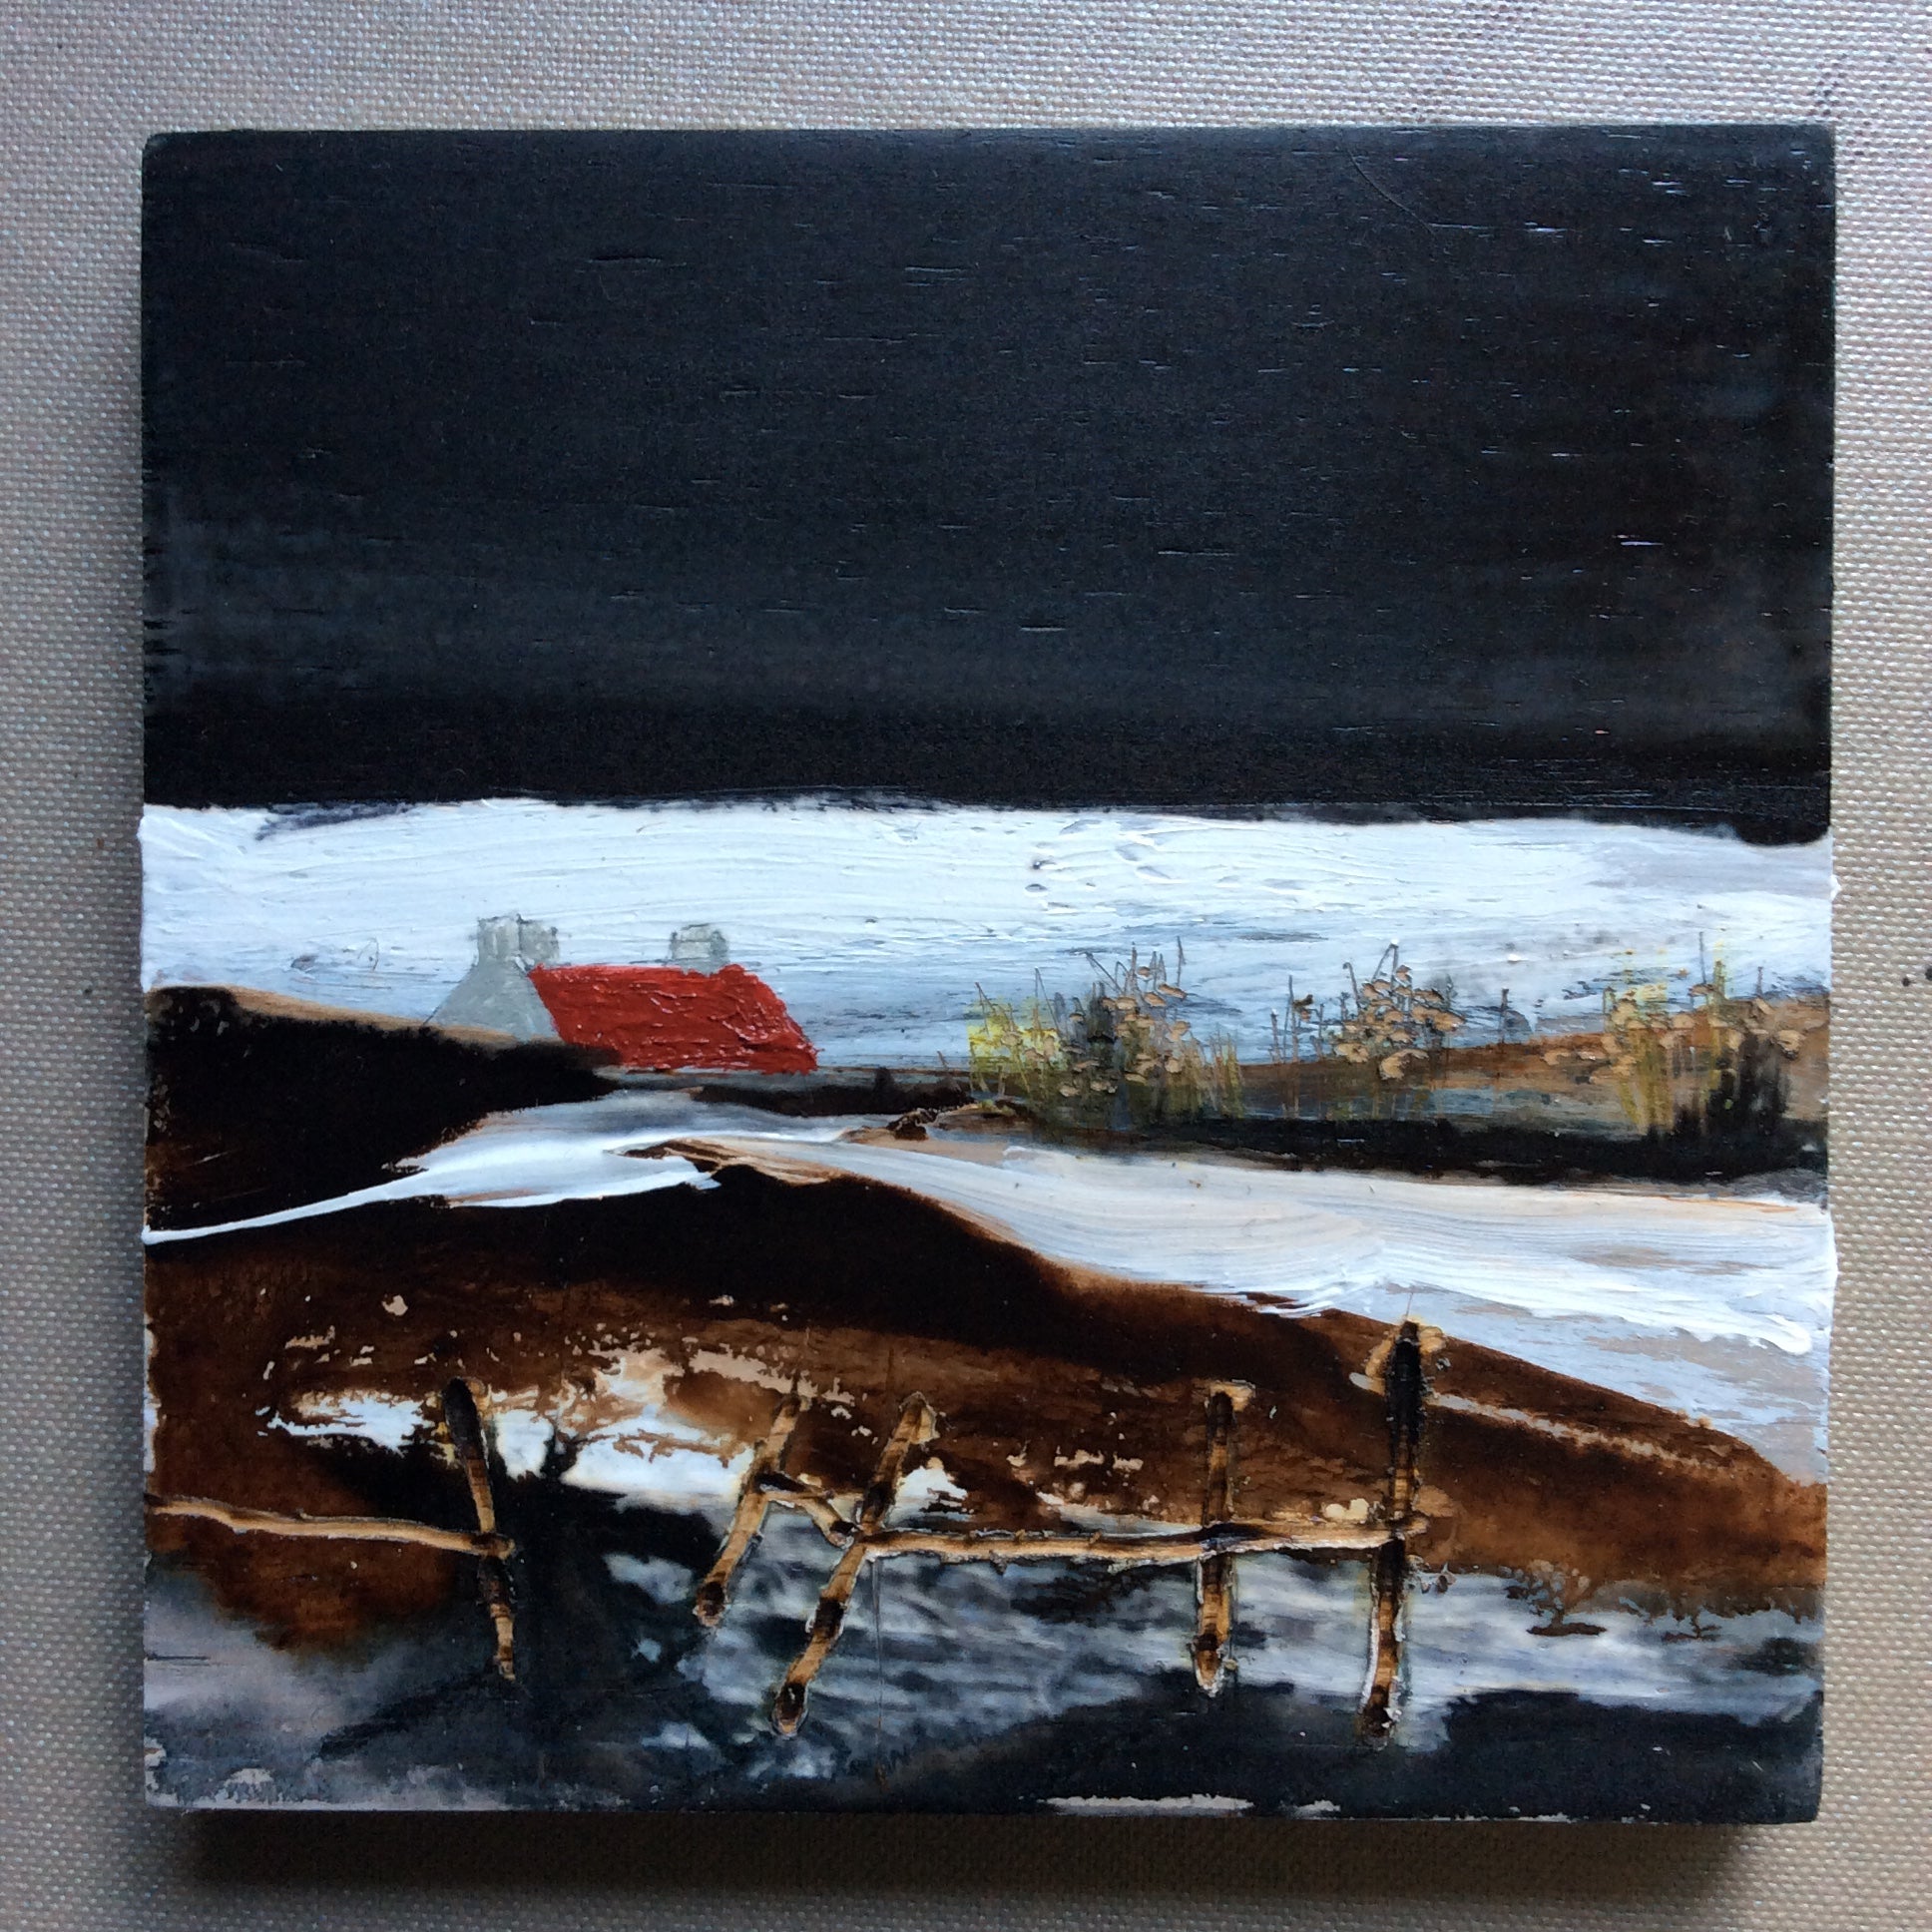 Mixed Media Art on wood By Louise O'Hara - "A harsh Winter”